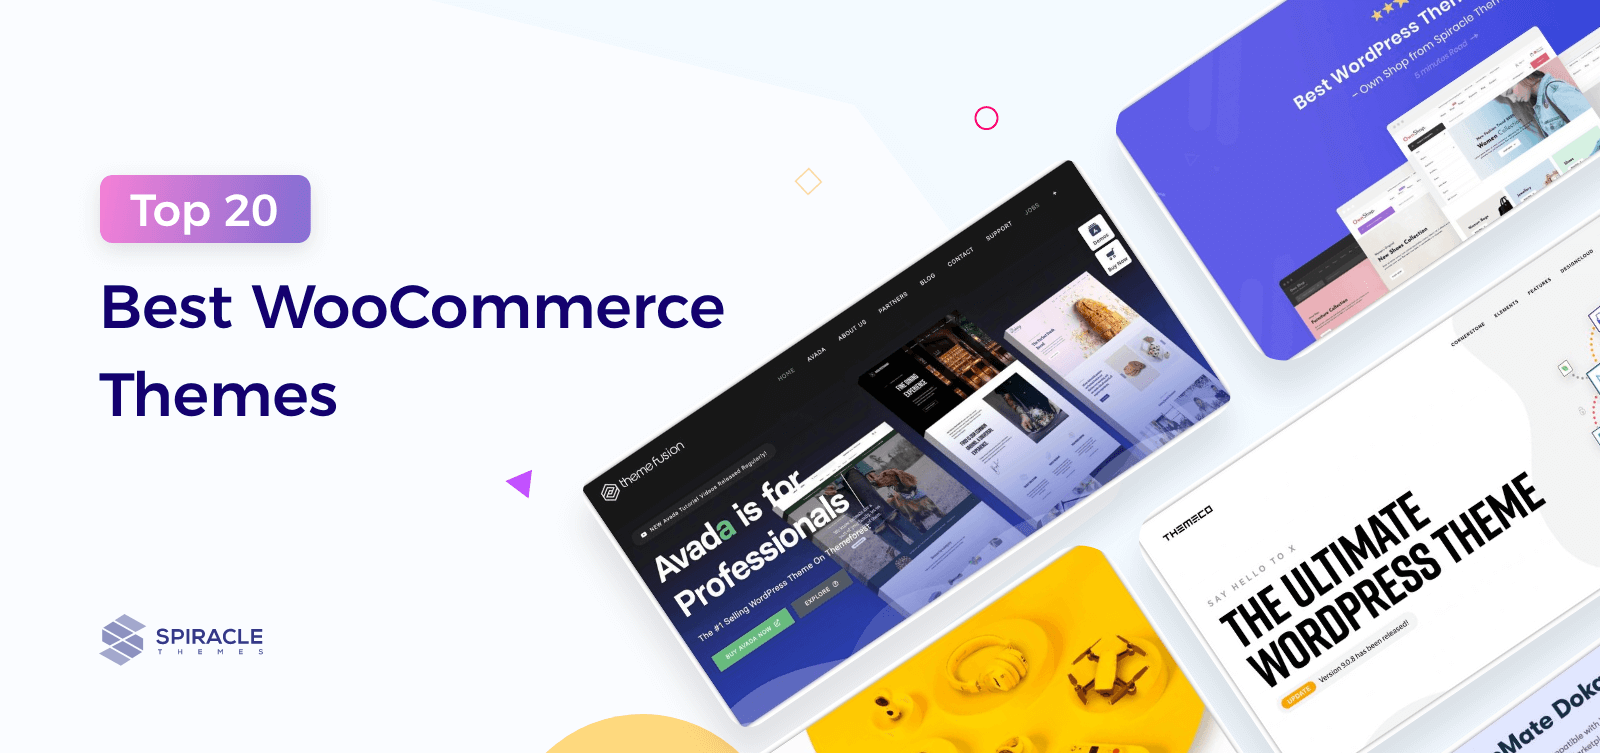 Top 20 Best WooCommerce Themes for Your eCommerce Store